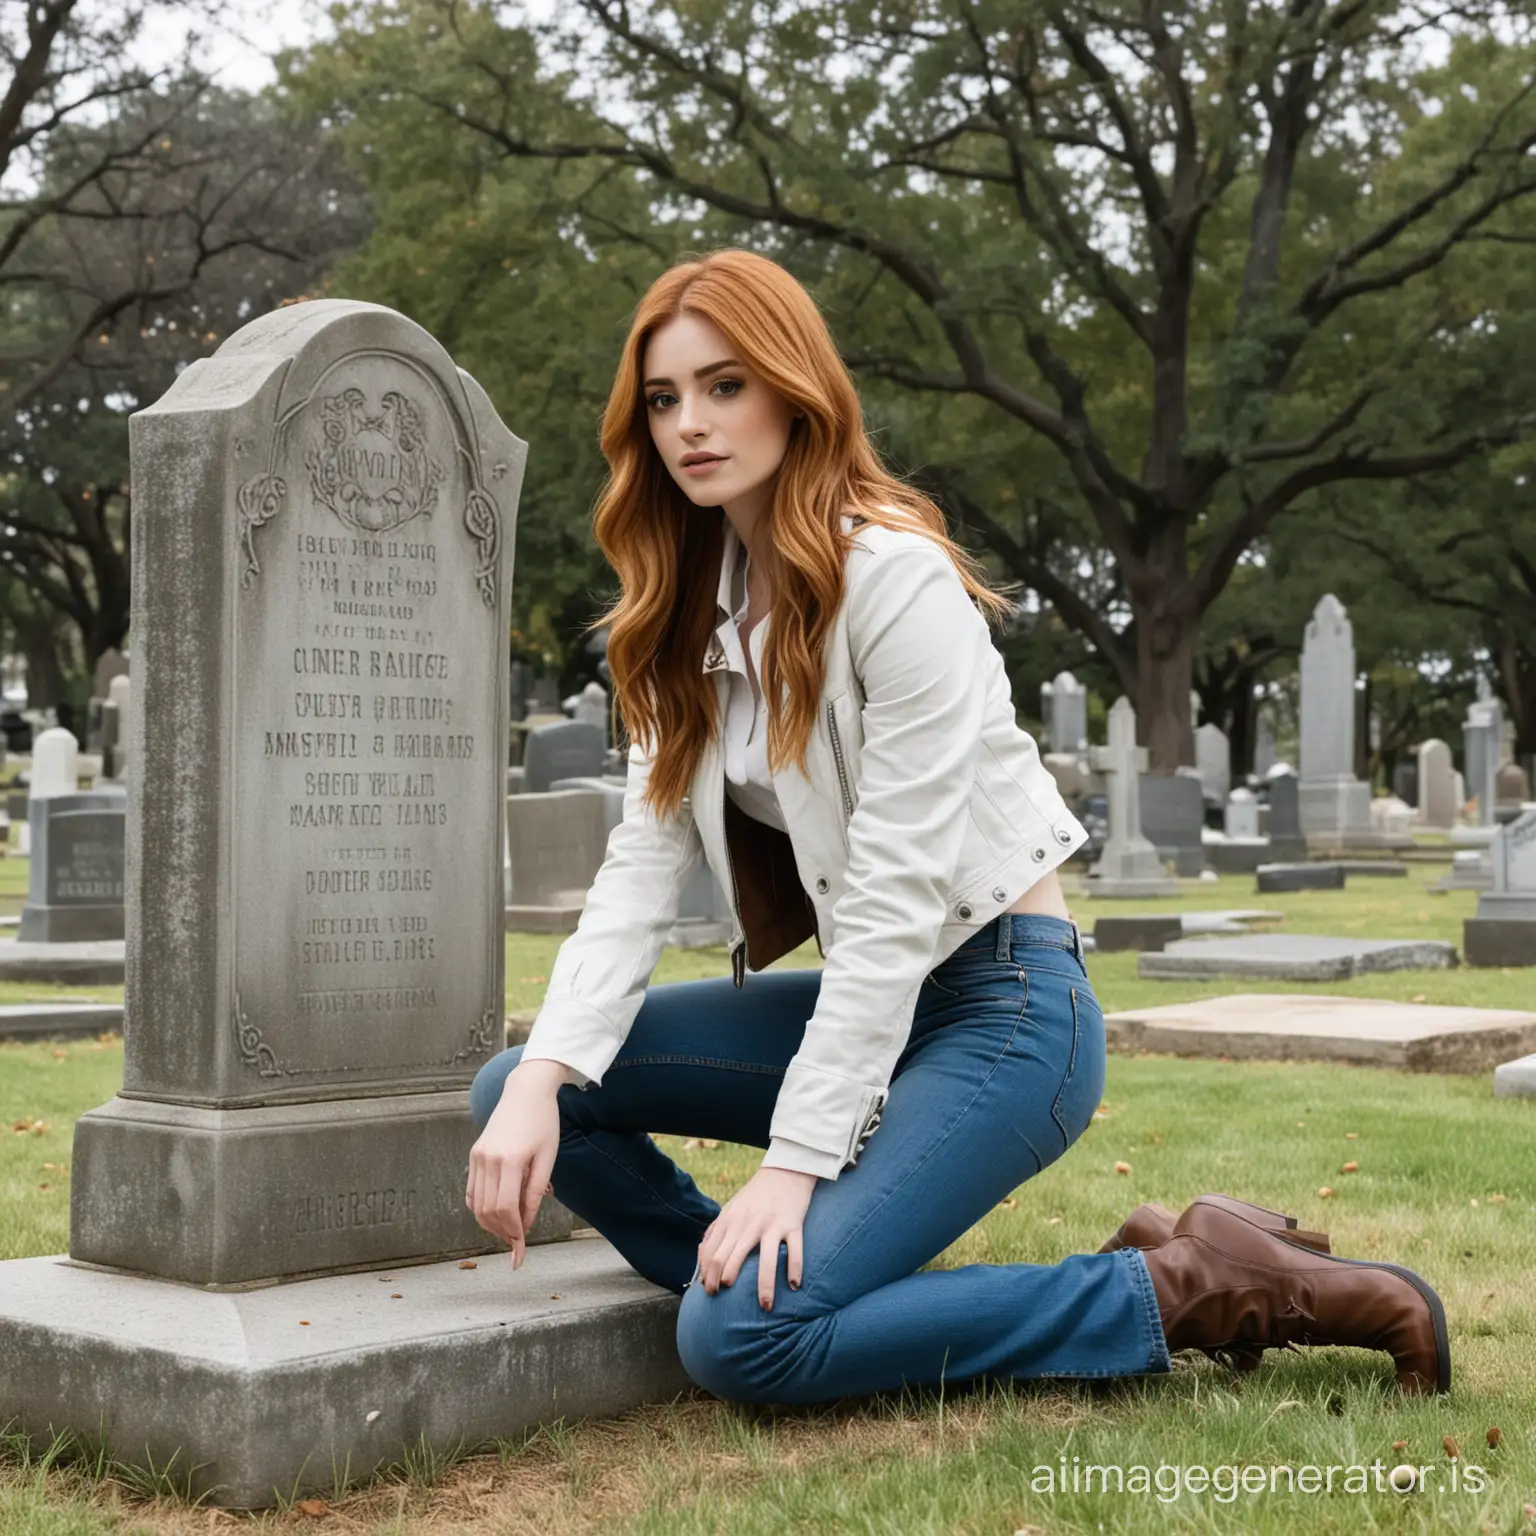 katherine mcnamara wearing a brown leather jacket, white shirt, and blue jeans kneeling down in front of a tombstone in a cemetery